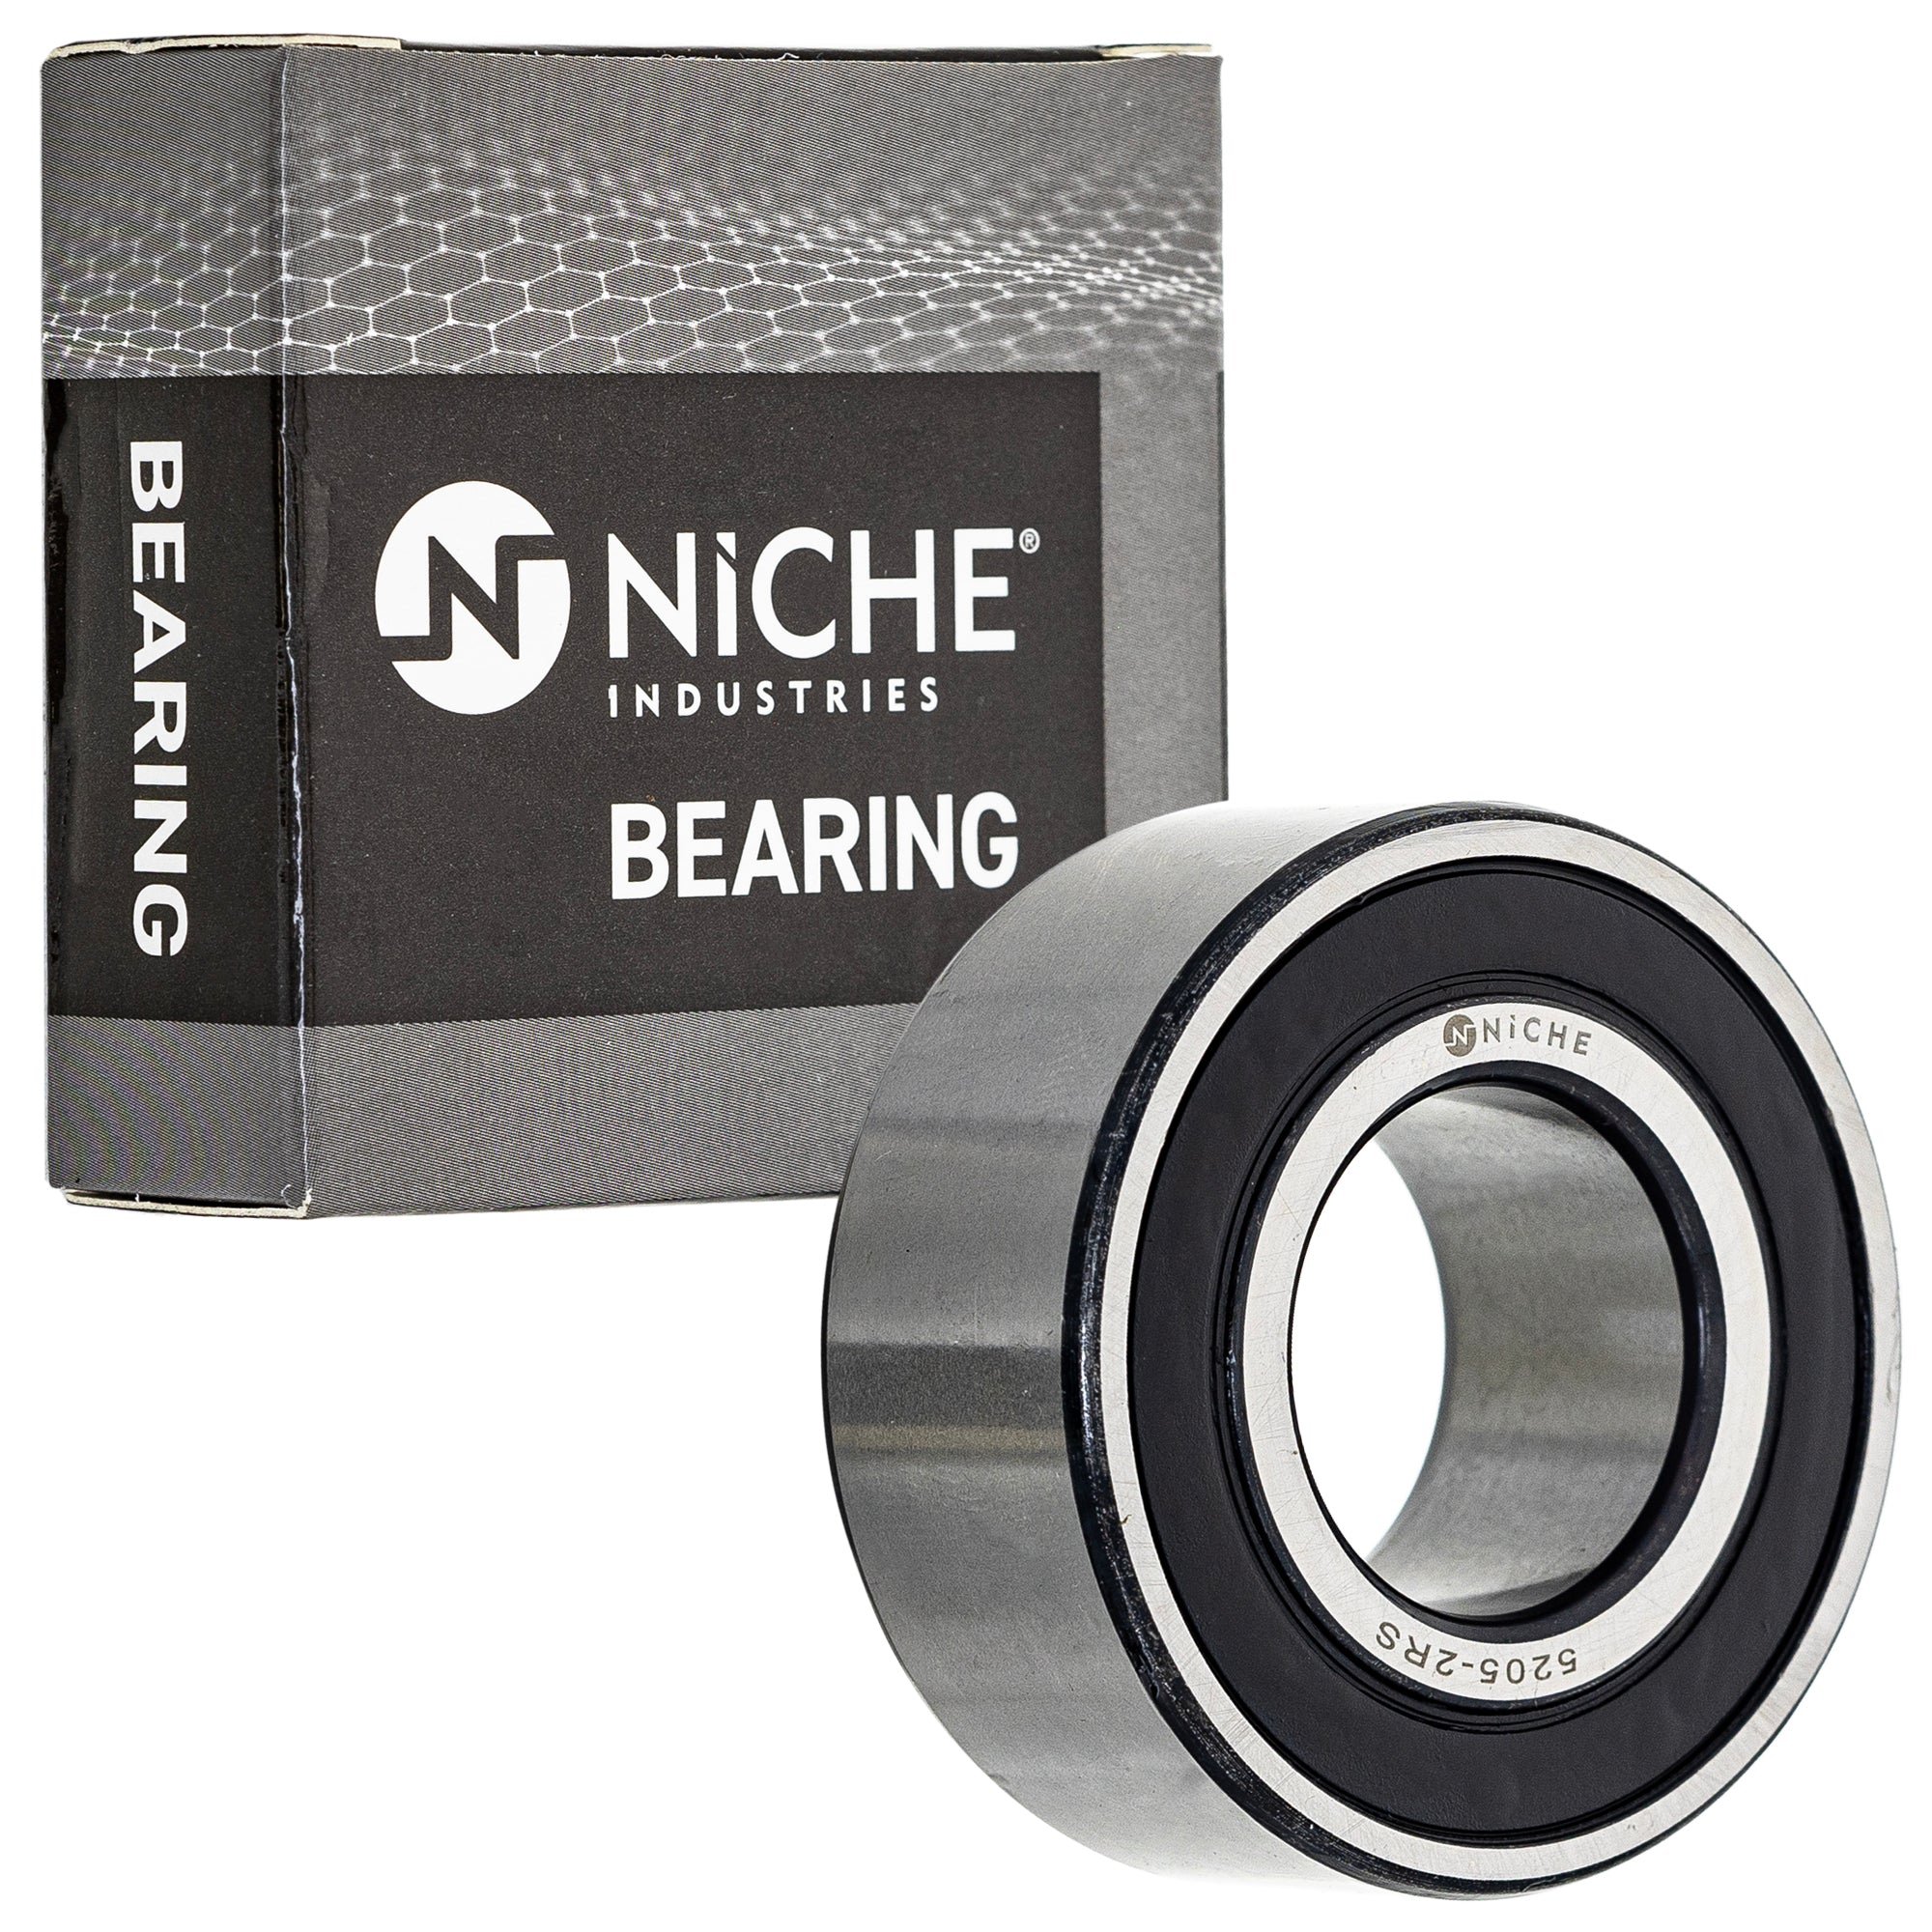 NICHE 519-CBB2279R Bearing 10-Pack for zOTHER K1100RS K1